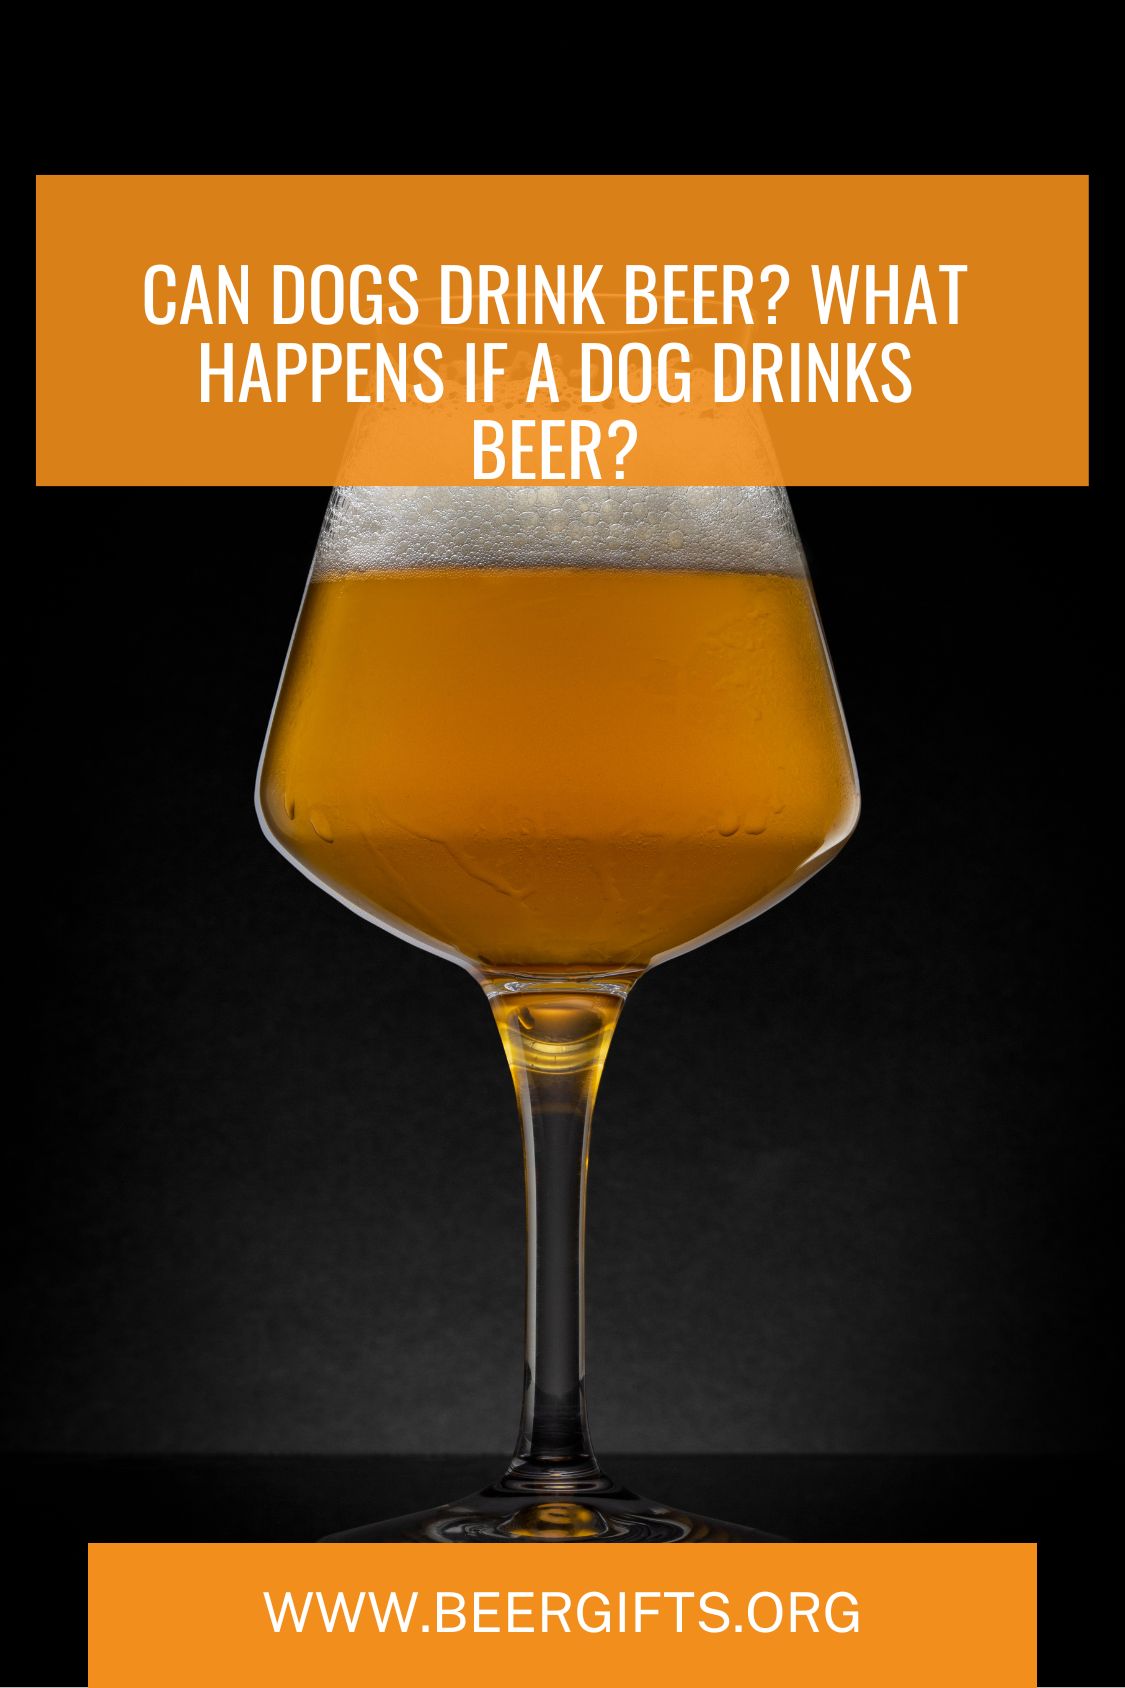 Can Dogs Drink Beer What Happens If a Dog Drinks Beer6